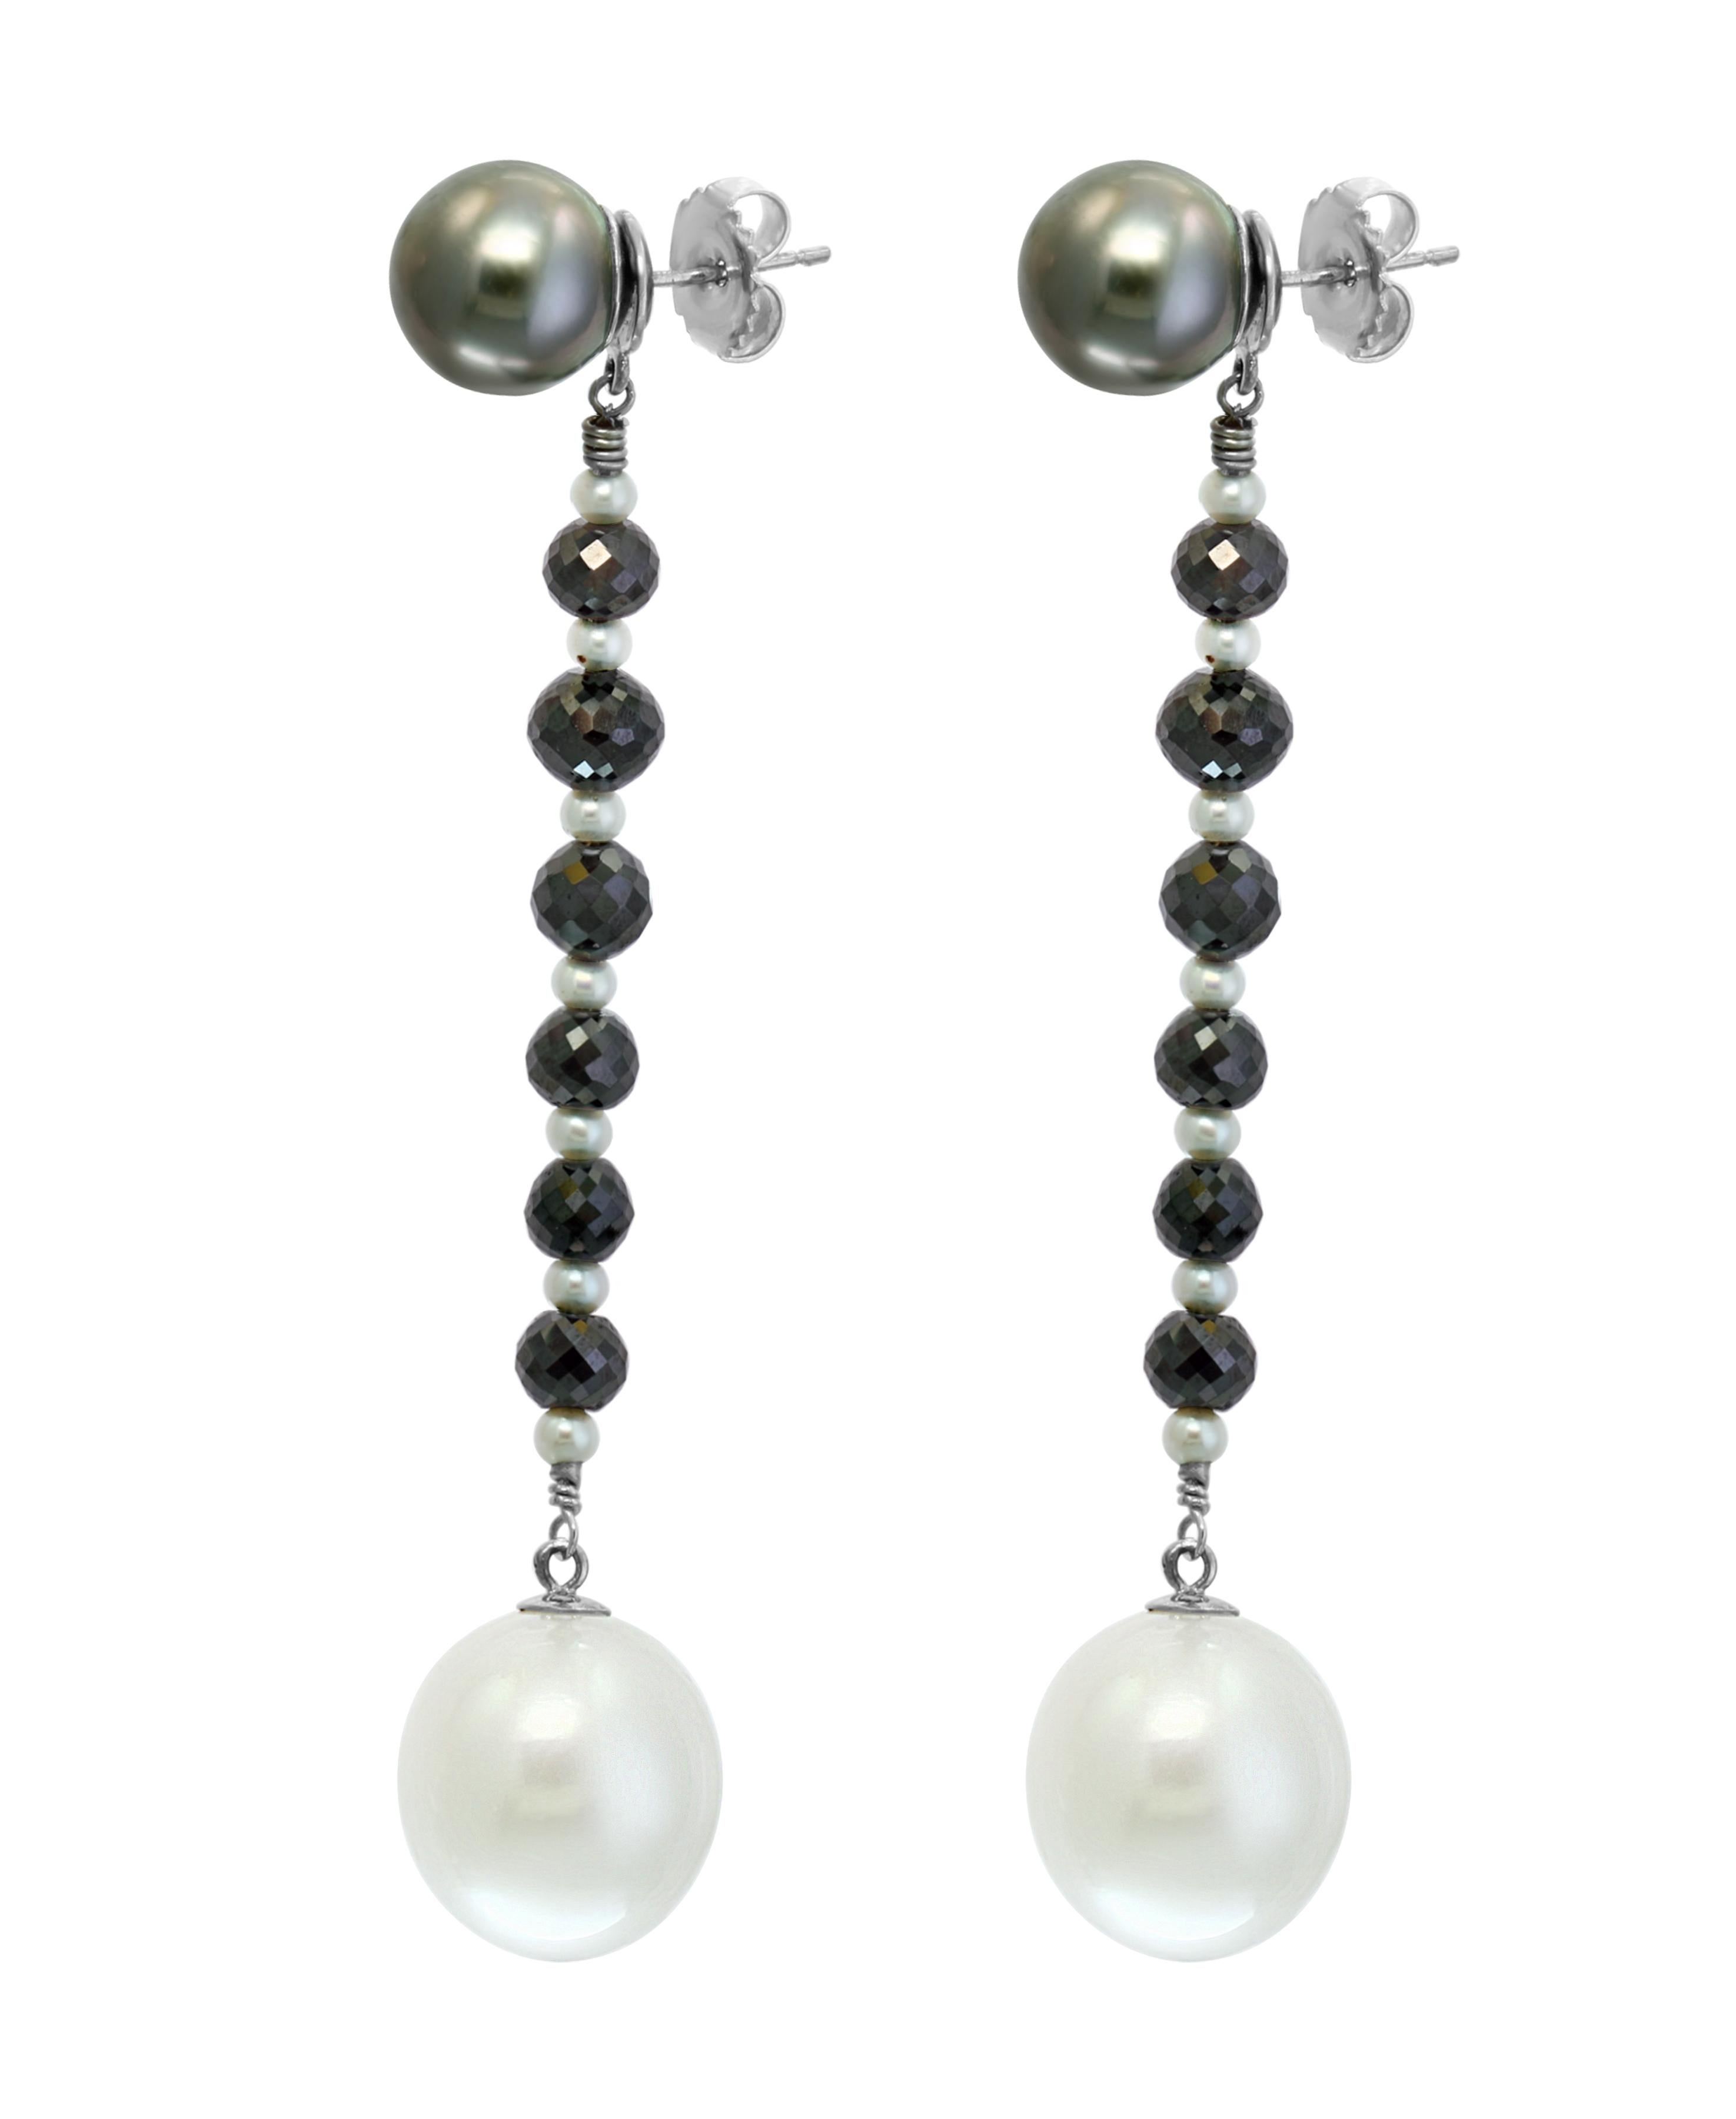 These dangle earrings feature a combination of South Sea Tahitian, cultured round pearls, South Sea white, drop shape cultured pearls, and black diamonds. The Tahitian pearls rest on the ear while the South Sea drops dangle from alternating small